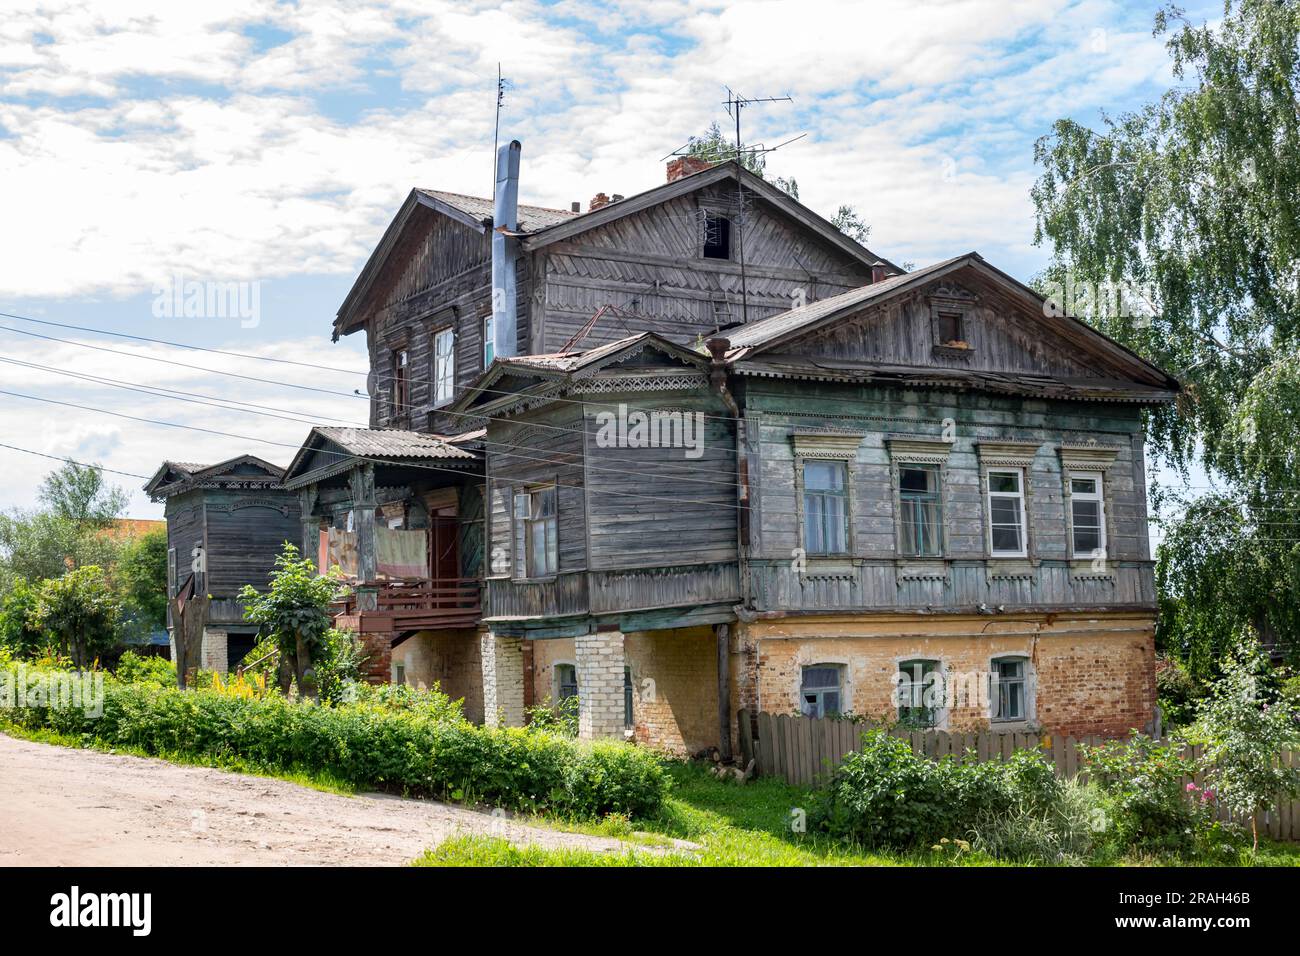 MALOYAROSLAVETS, RUSSIA - JULY 2015: Former mansion of the Nelubovs of the 19th century. Russian wooden architecture Stock Photo